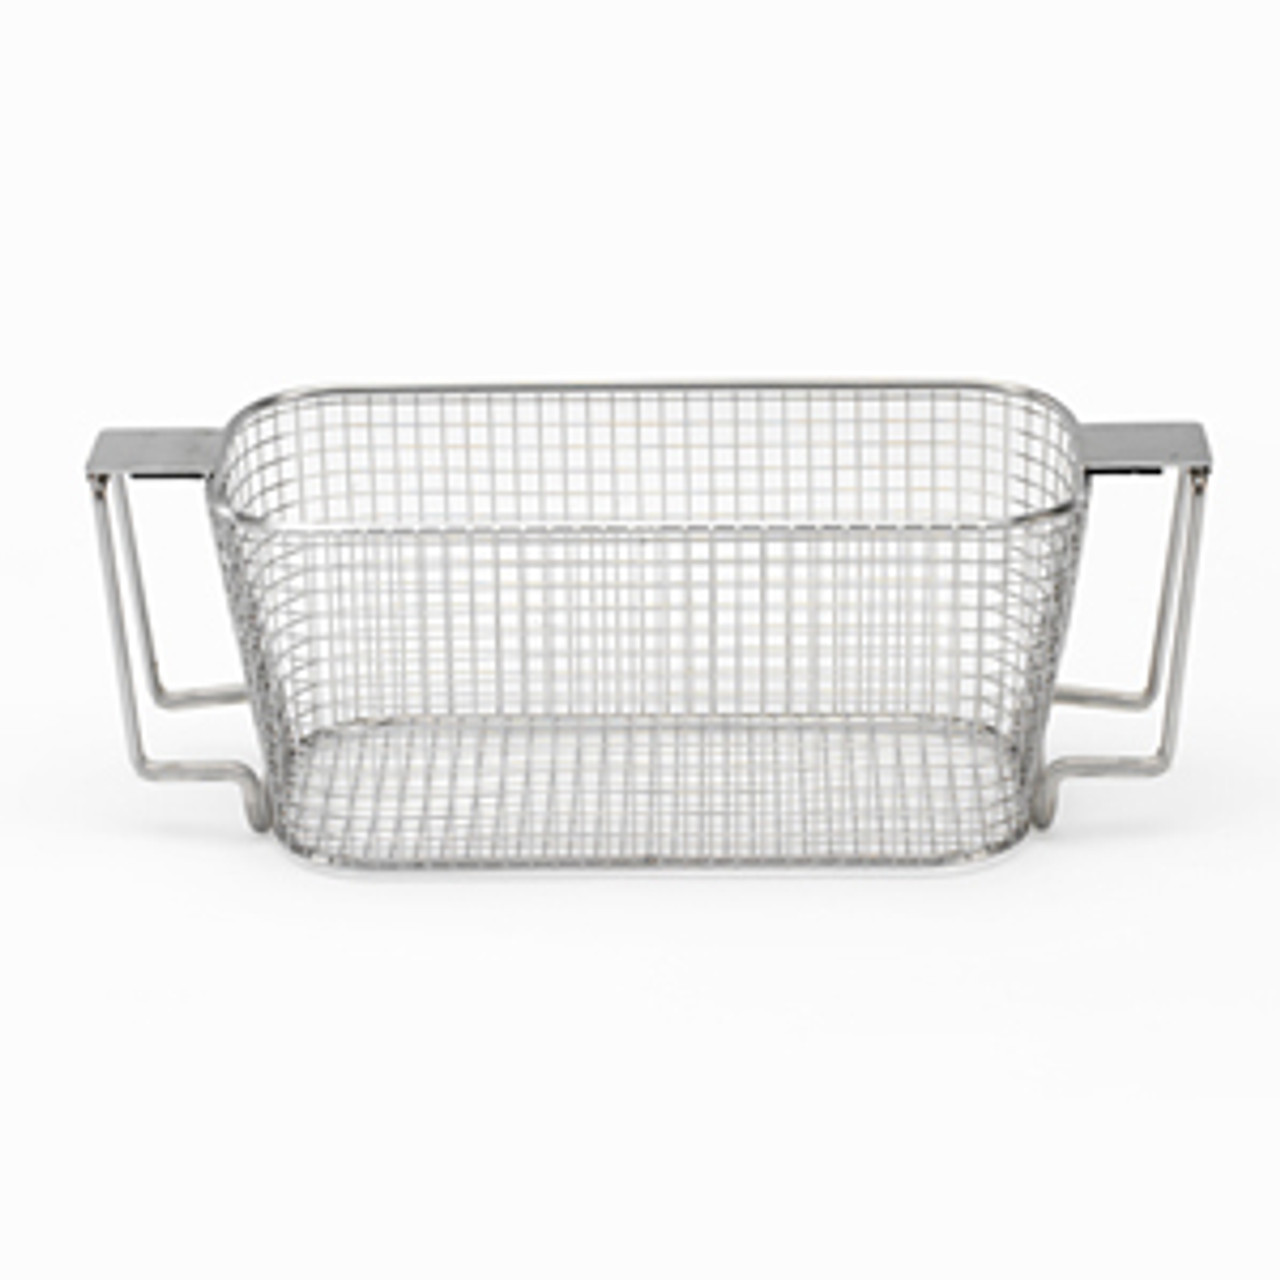 Stainless Steel Mesh Basket for Crest CP2600 Ultrasonic Cleaners,  SSMB2600-DH